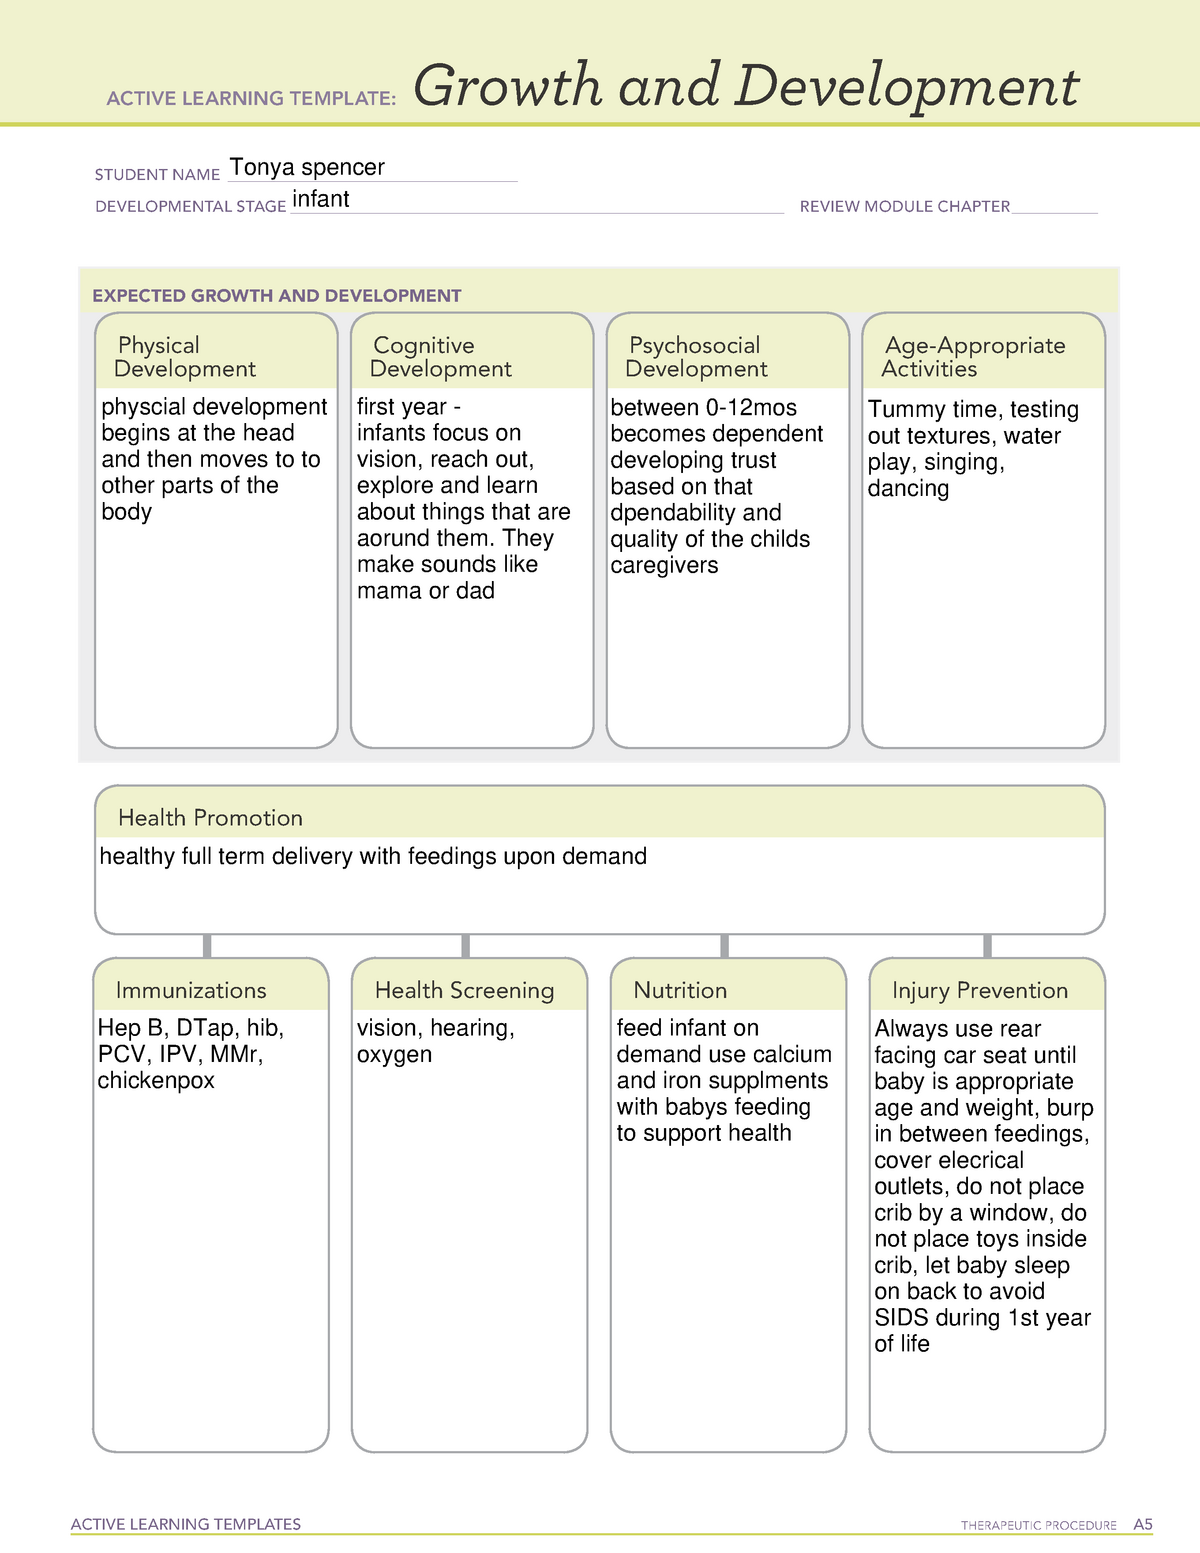 Infant assessment ati template for misc. online coursework ACTIVE